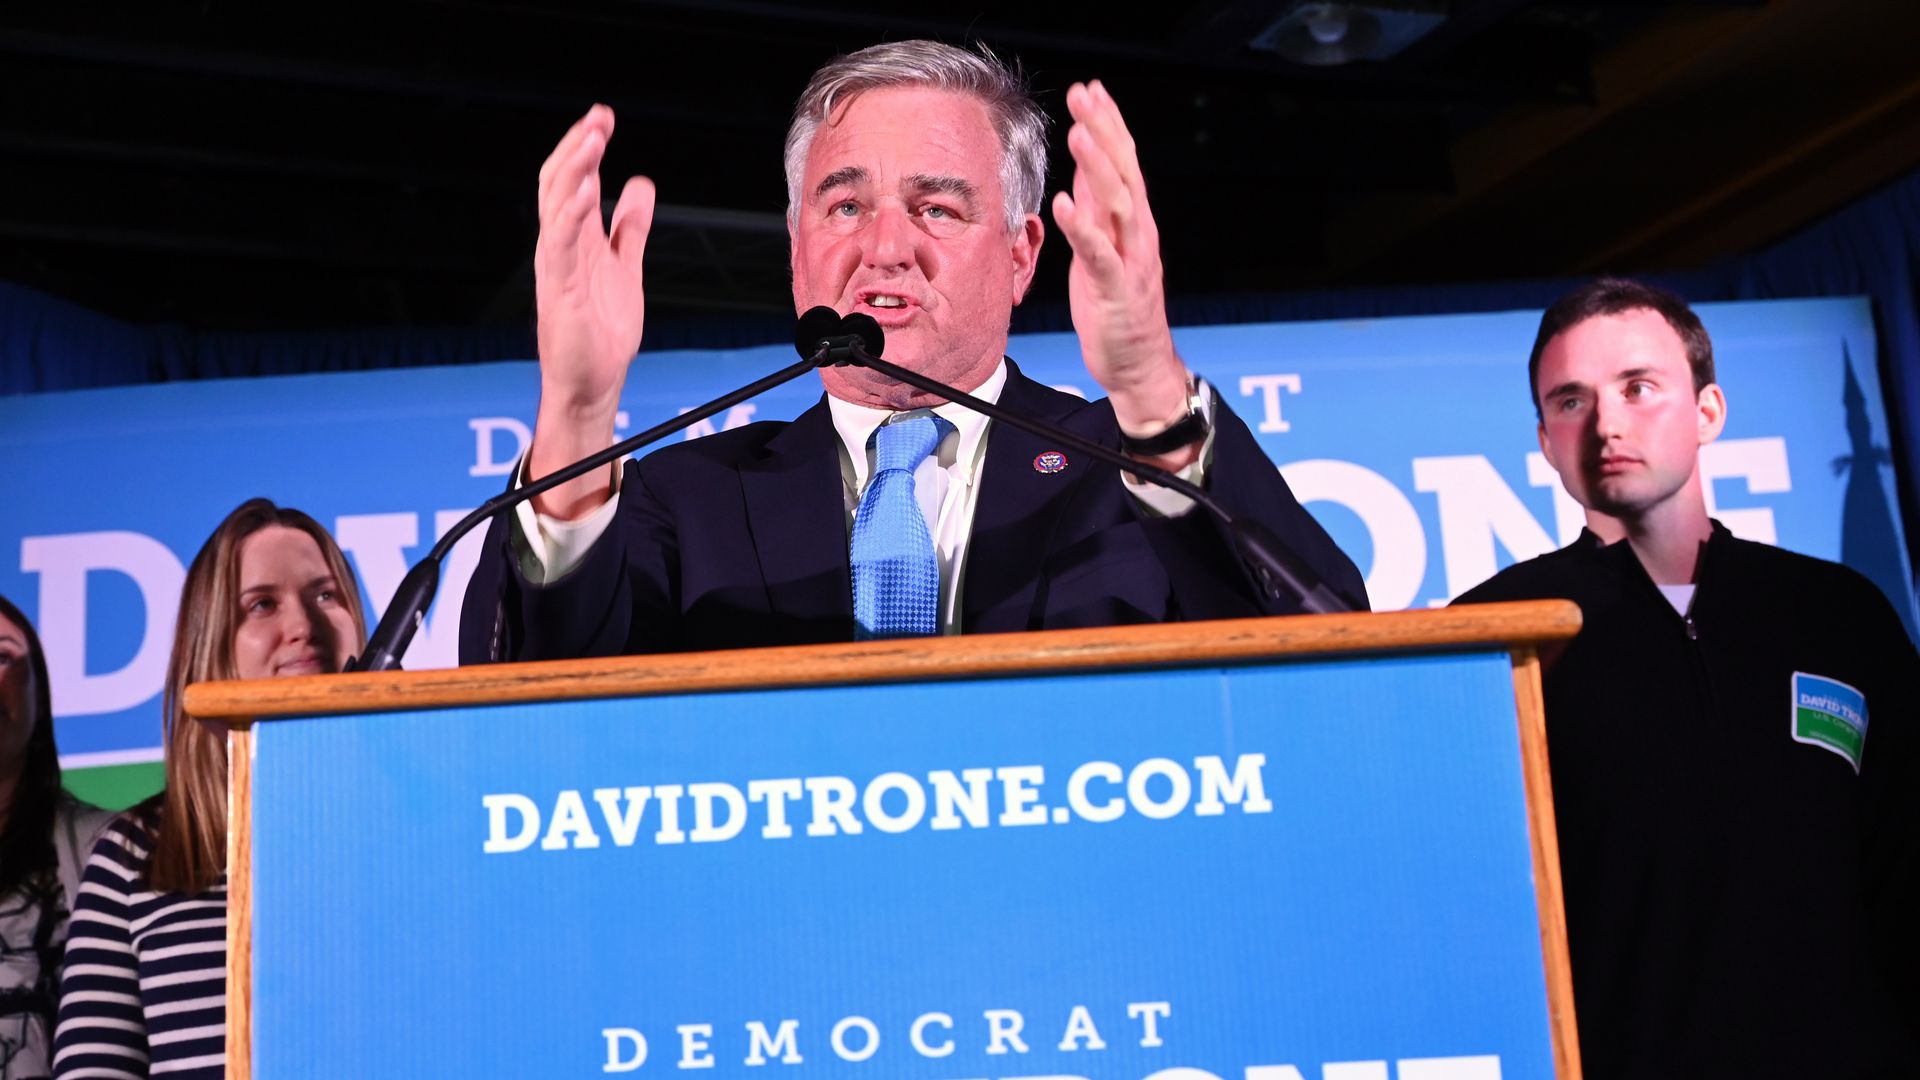 David Trone speaks at an election night event